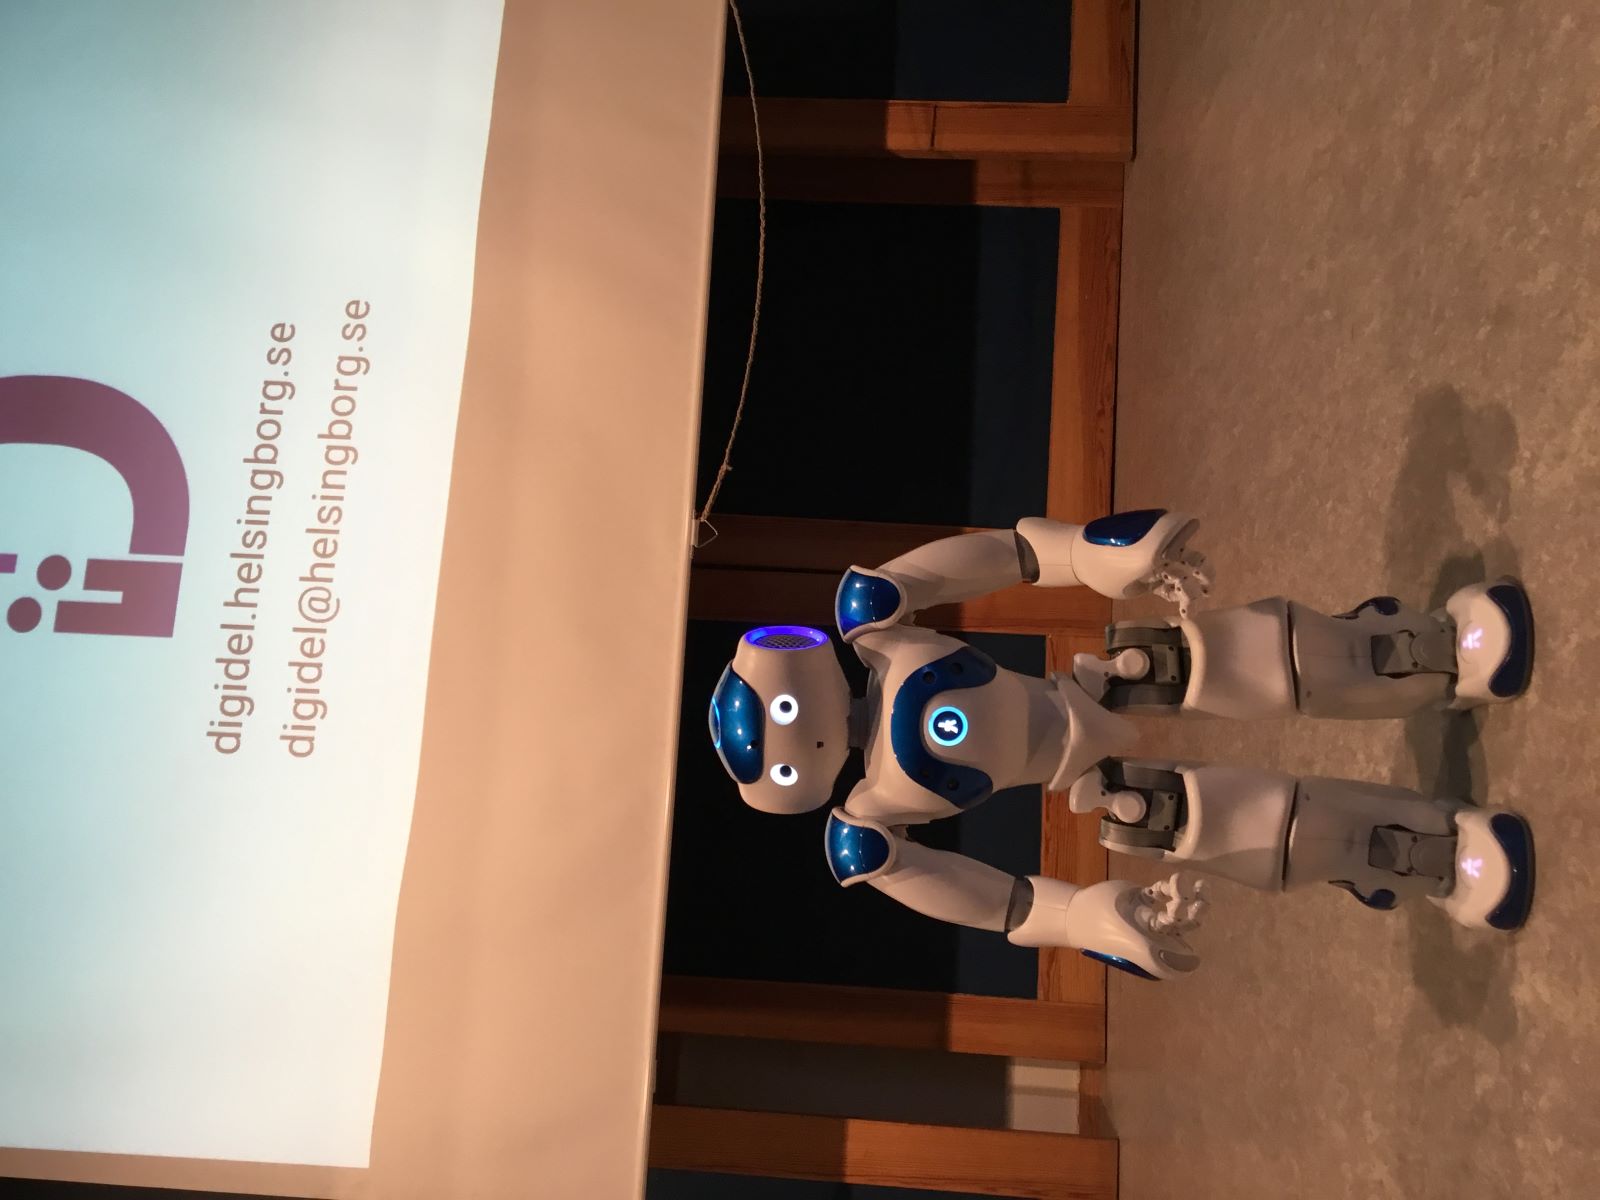 “NAO, the library´s humanoid robot, performing on the stage ” by Helsingborg Public Library is licensed under CC BY 4.0